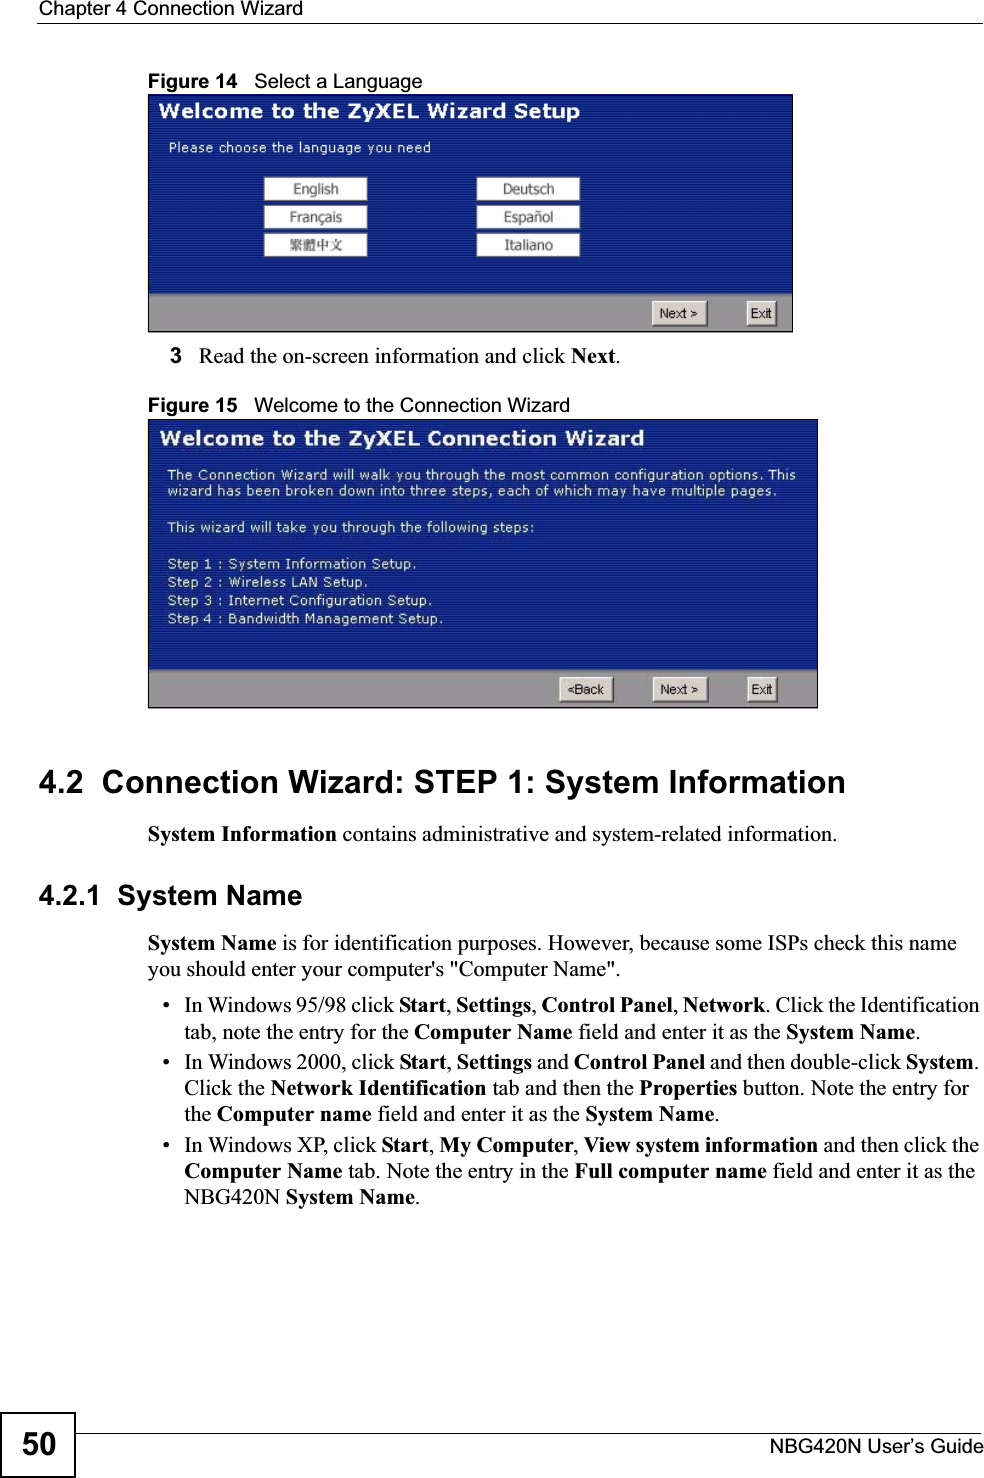 Chapter 4 Connection WizardNBG420N User’s Guide50Figure 14   Select a Language3Read the on-screen information and click Next.Figure 15   Welcome to the Connection Wizard4.2  Connection Wizard: STEP 1: System InformationSystem Information contains administrative and system-related information.4.2.1  System NameSystem Name is for identification purposes. However, because some ISPs check this name you should enter your computer&apos;s &quot;Computer Name&quot;. • In Windows 95/98 click Start, Settings, Control Panel, Network. Click the Identification tab, note the entry for the Computer Name field and enter it as the System Name.• In Windows 2000, click Start, Settings and Control Panel and then double-click System.Click the Network Identification tab and then the Properties button. Note the entry for the Computer name field and enter it as the System Name.• In Windows XP, click Start, My Computer, View system information and then click the Computer Name tab. Note the entry in the Full computer name field and enter it as the NBG420N System Name.